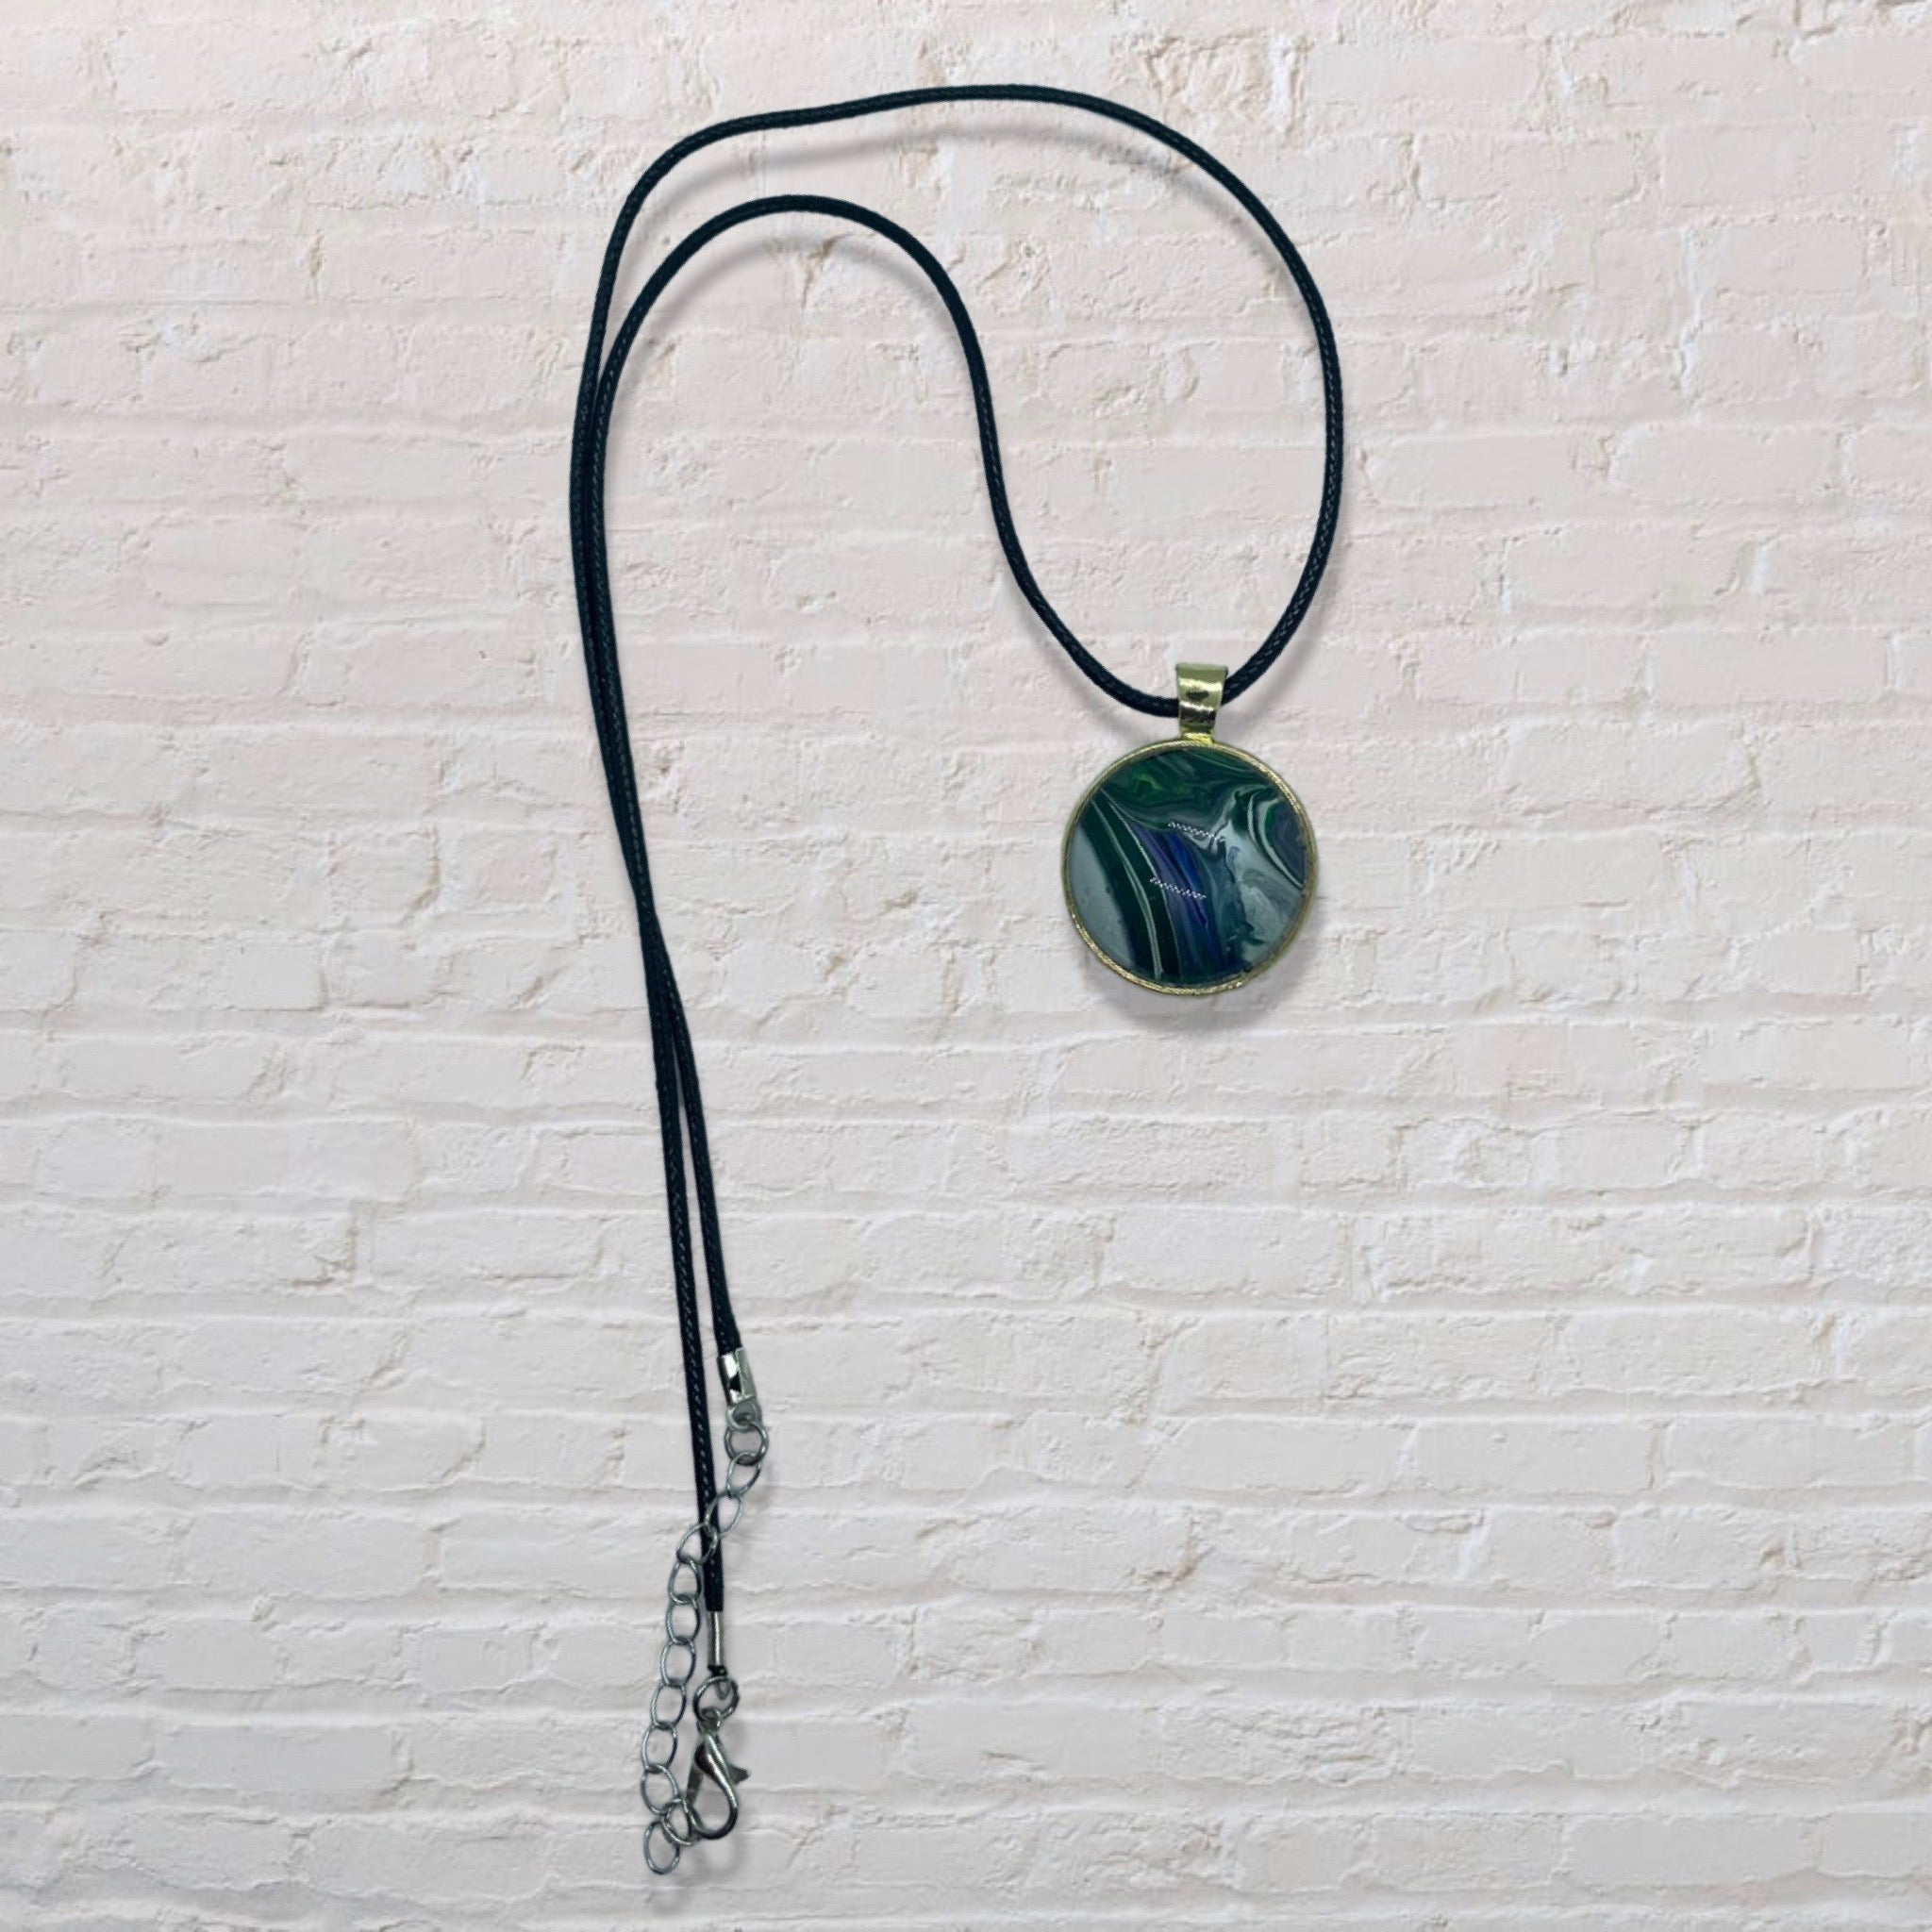 By The Kids -- Paint Pour Necklace - Blue, White and Black